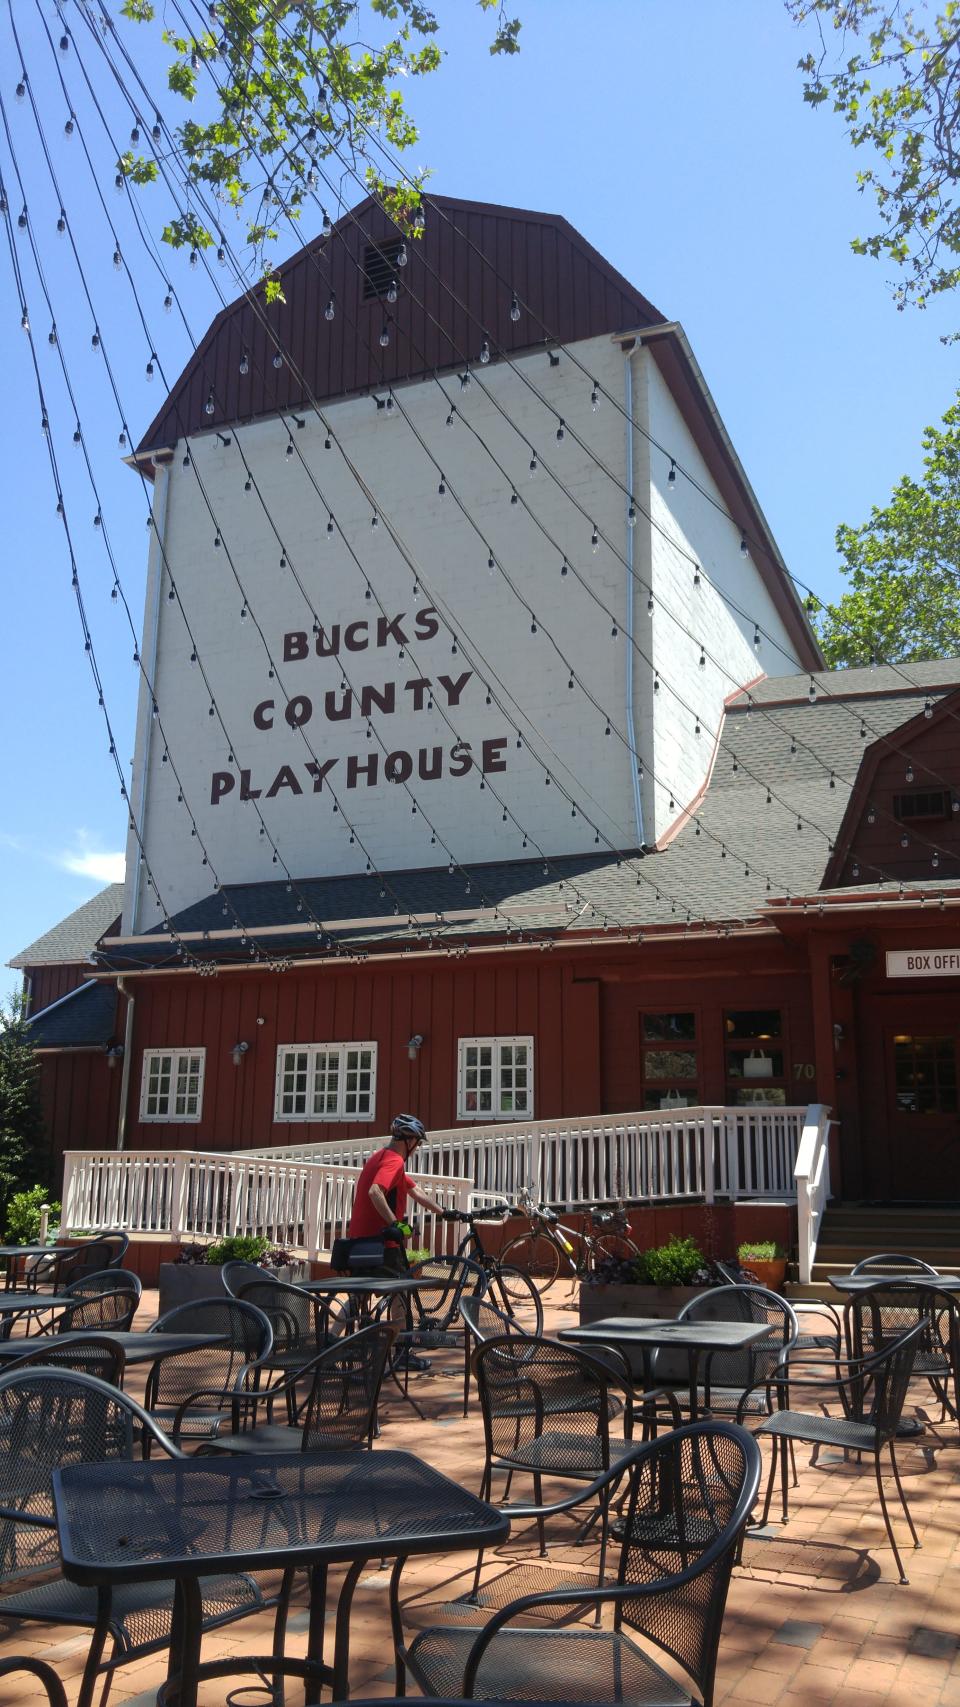 Today's Bucks County Playhouse was once the New Hope Grist Mill that gave its name to the town favored by tourists.